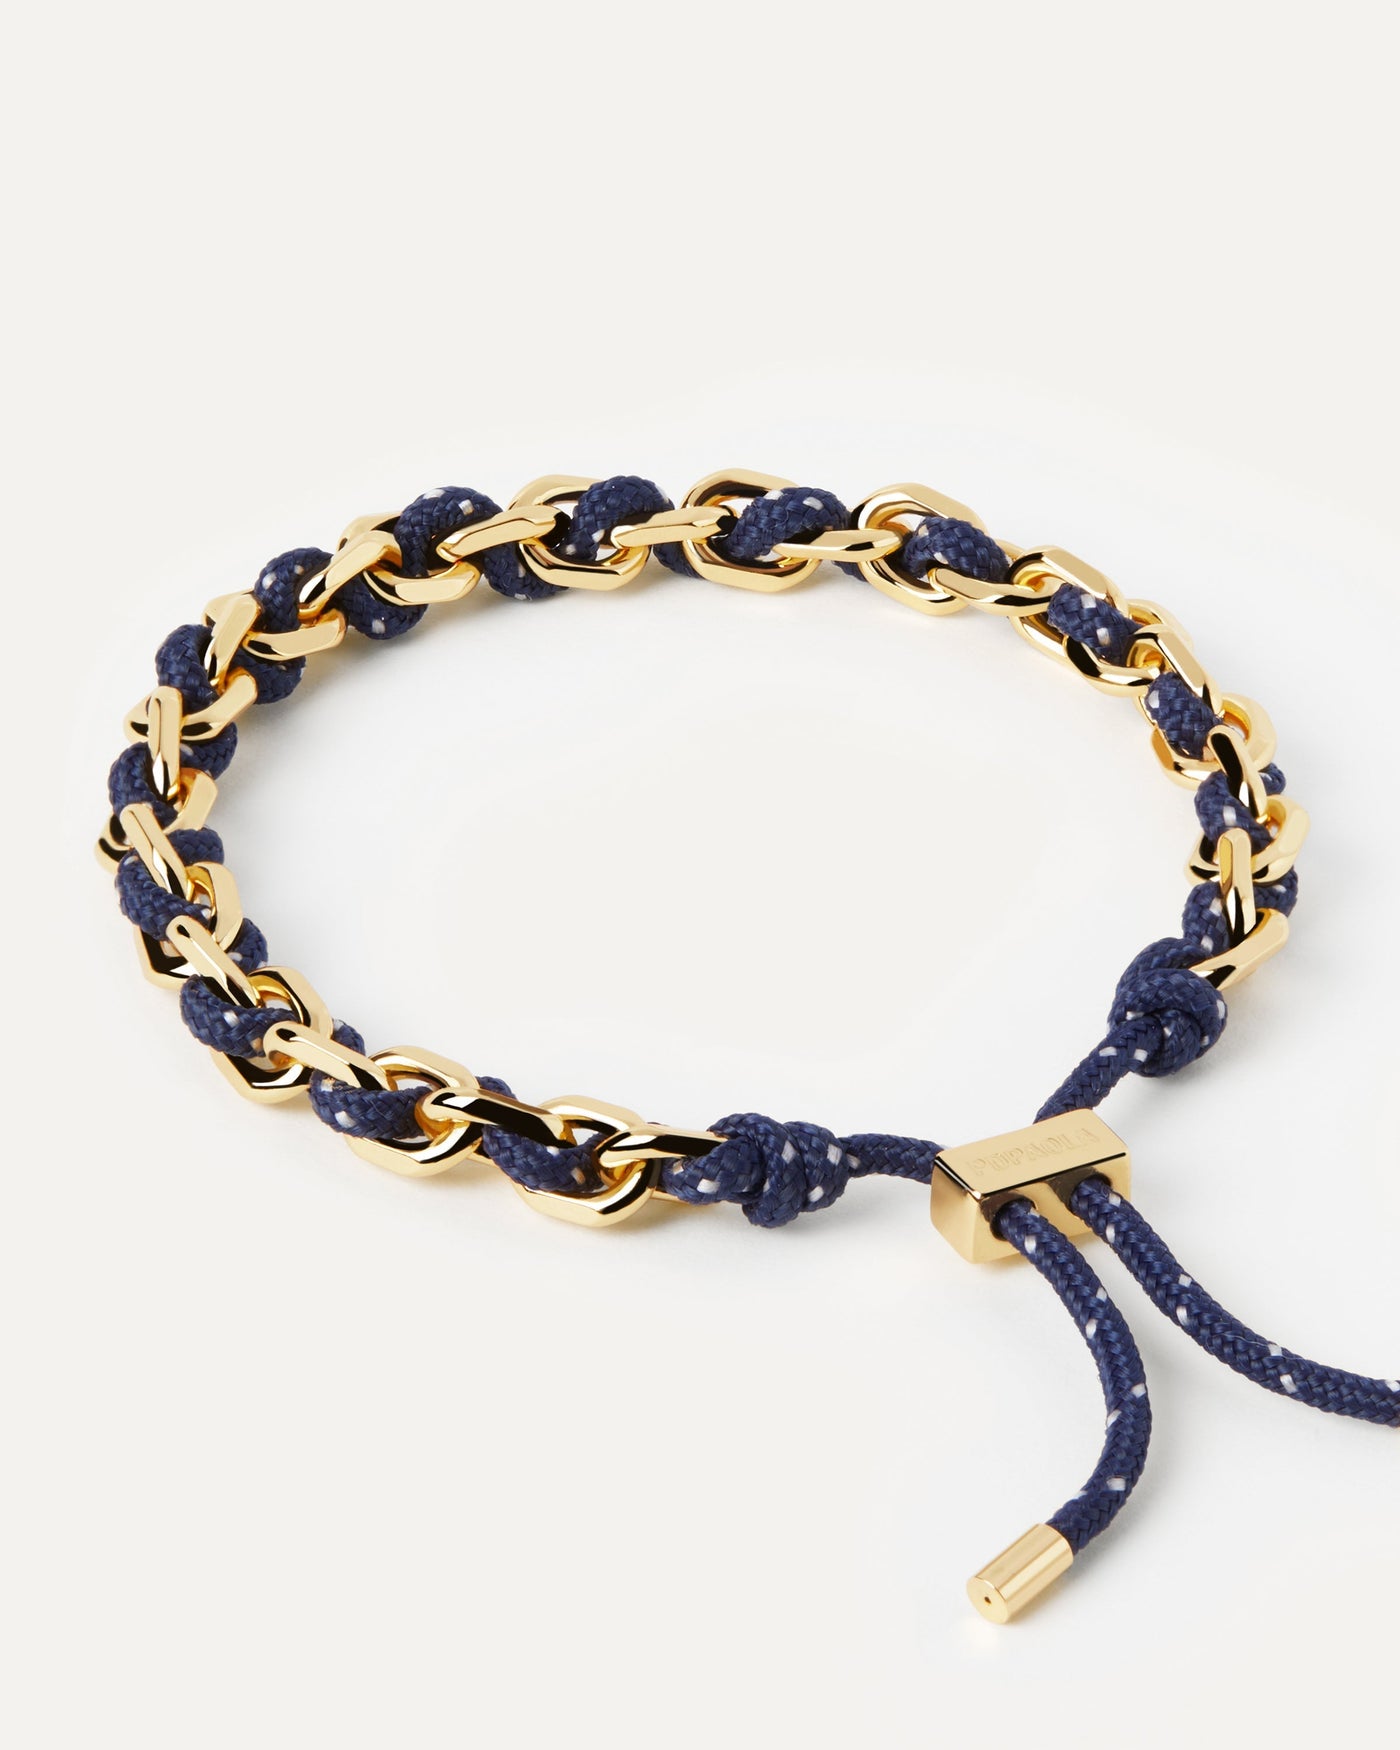 2023 Selection | Midnight Rope and Chain Bracelet. Golden chain bracelet with a navy blue rope adjustable sliding clasp. Get the latest arrival from PDPAOLA. Place your order safely and get this Best Seller. Free Shipping.